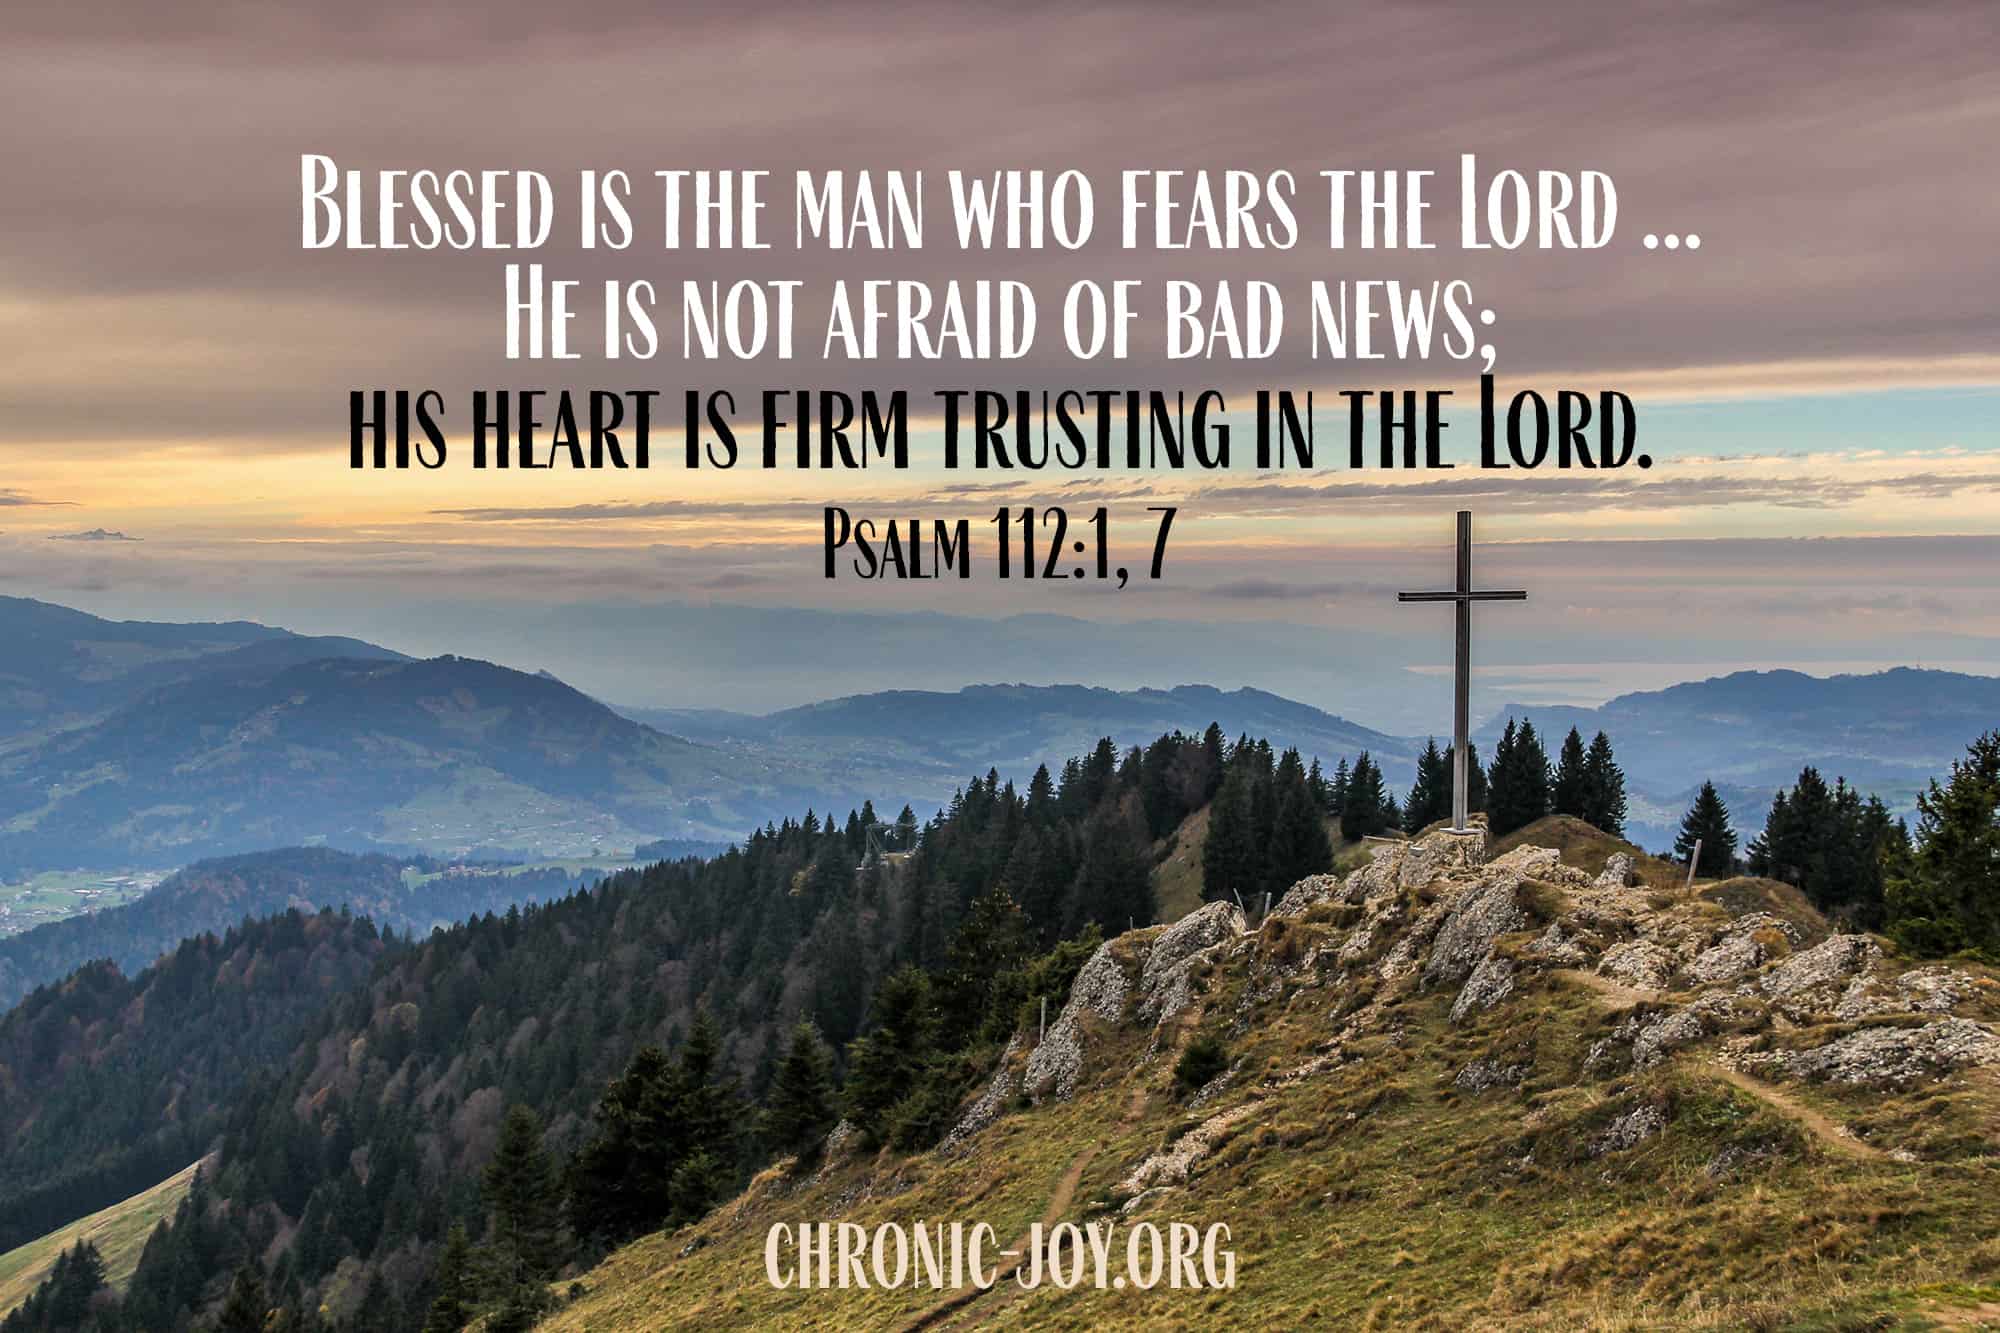 "Blessed is the man who fears the Lord ... He is not afraid of bad news; his heart is firm trusting in the Lord." Psalm 112:1, 7